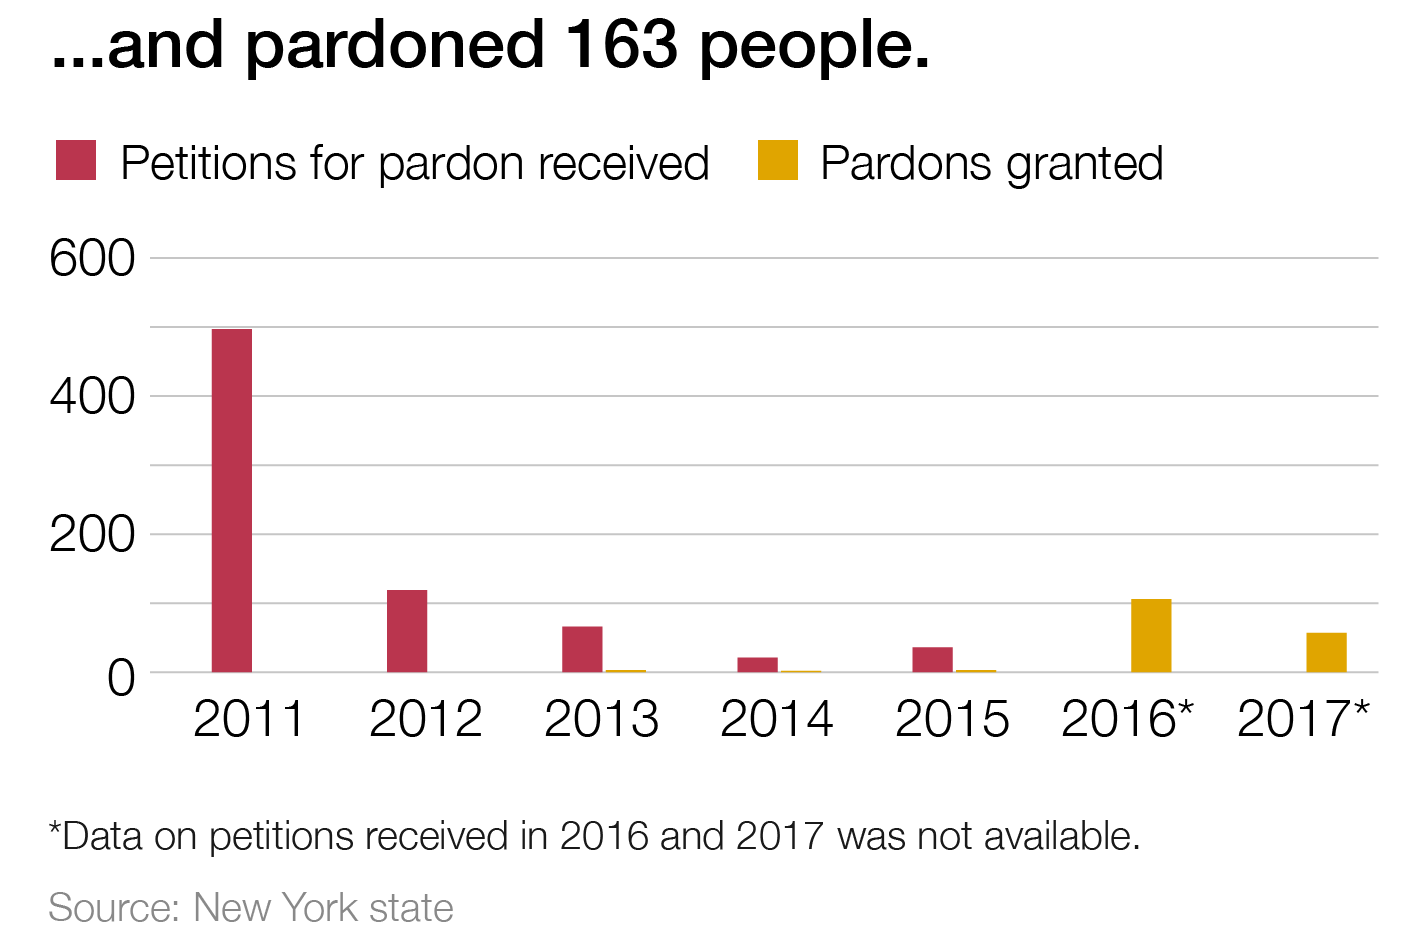 A graph displaying the numbers of petitions for pardon received versus pardons granted from 2011-2017. There are nearly 500 in 2011 with none granted, and over 100 in 2012 with none granted. From 2013-2015 there are between 50 and 100 petitions with very small numbers granted. 50-100 pardons were granted in each of 2016 and 2017. Data on petitions received in 2016 and 2017 was not available.